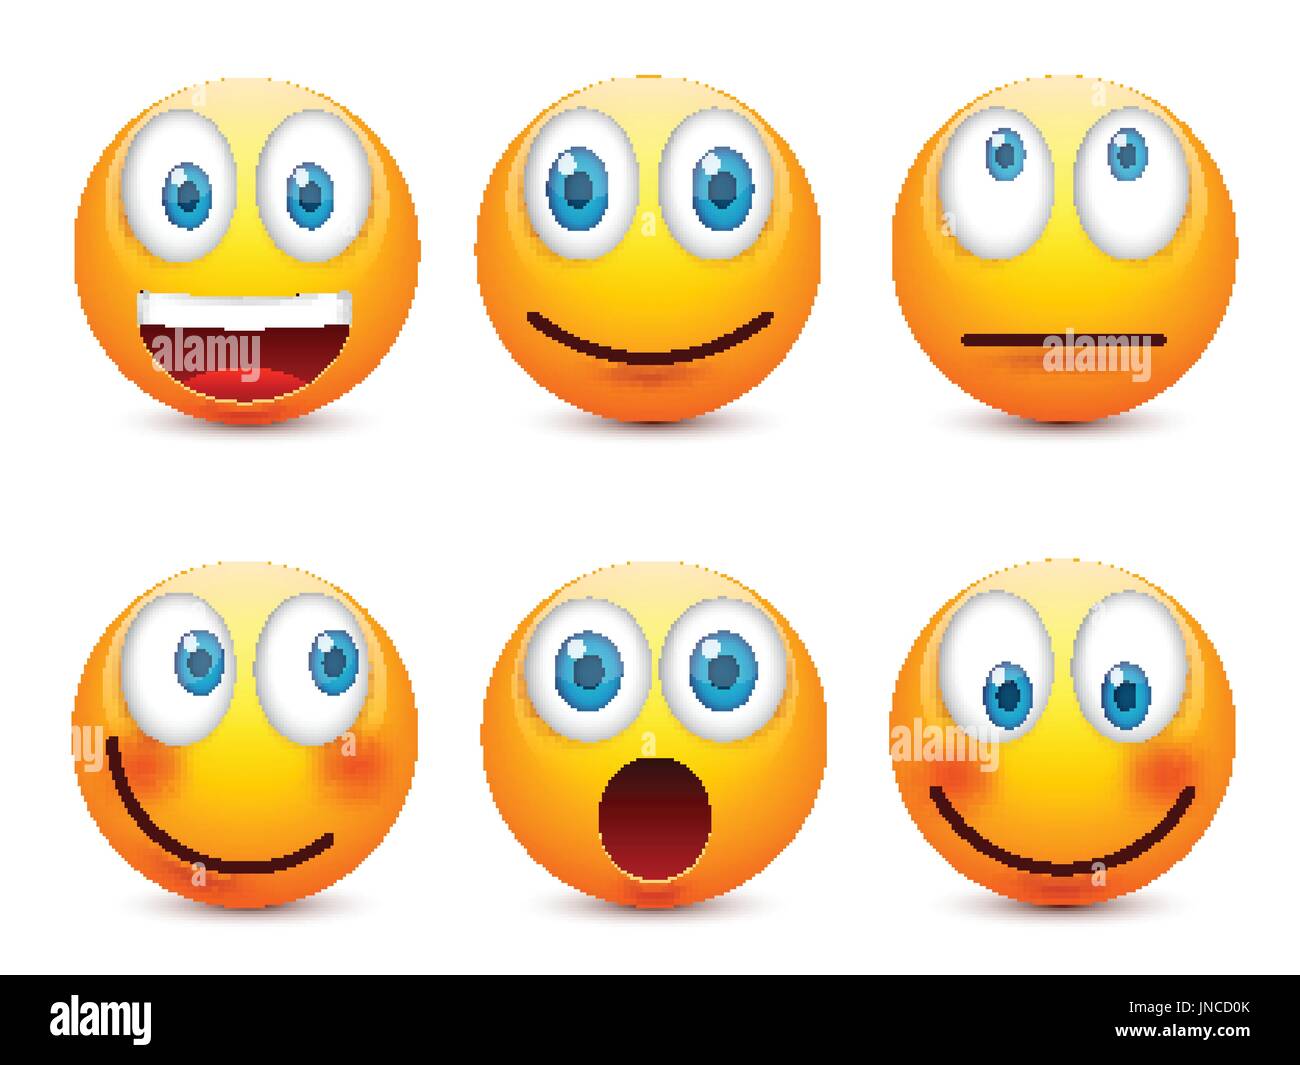 Smiley With Blue Eyes Emoticon Set Yellow Face With Emotions Facial Expression 3d Realistic Emoji Sad Happy Angry Faces Funny Cartoon Character Mood Vector Illustration Stock Vector Image Art Alamy